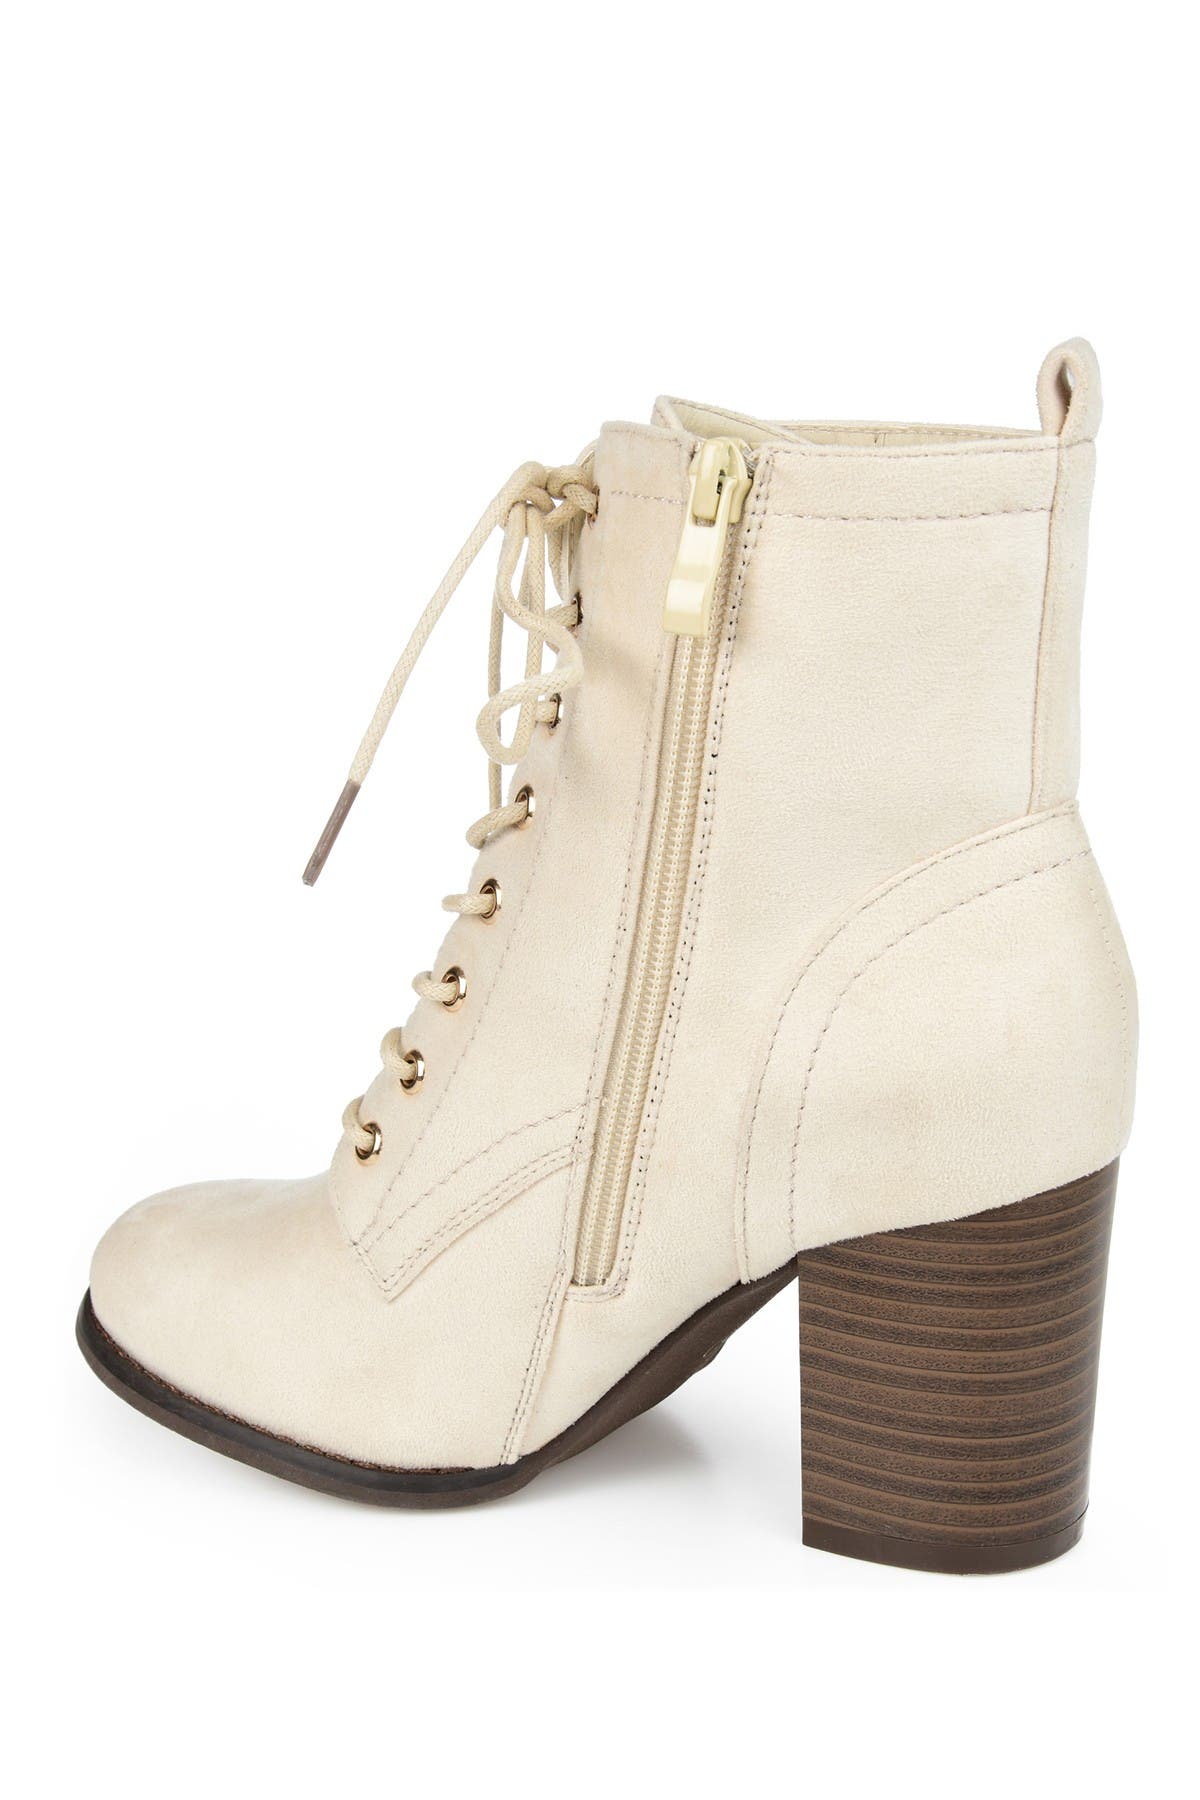 Journee Collection Baylor Lace-up Boot In Light Beige